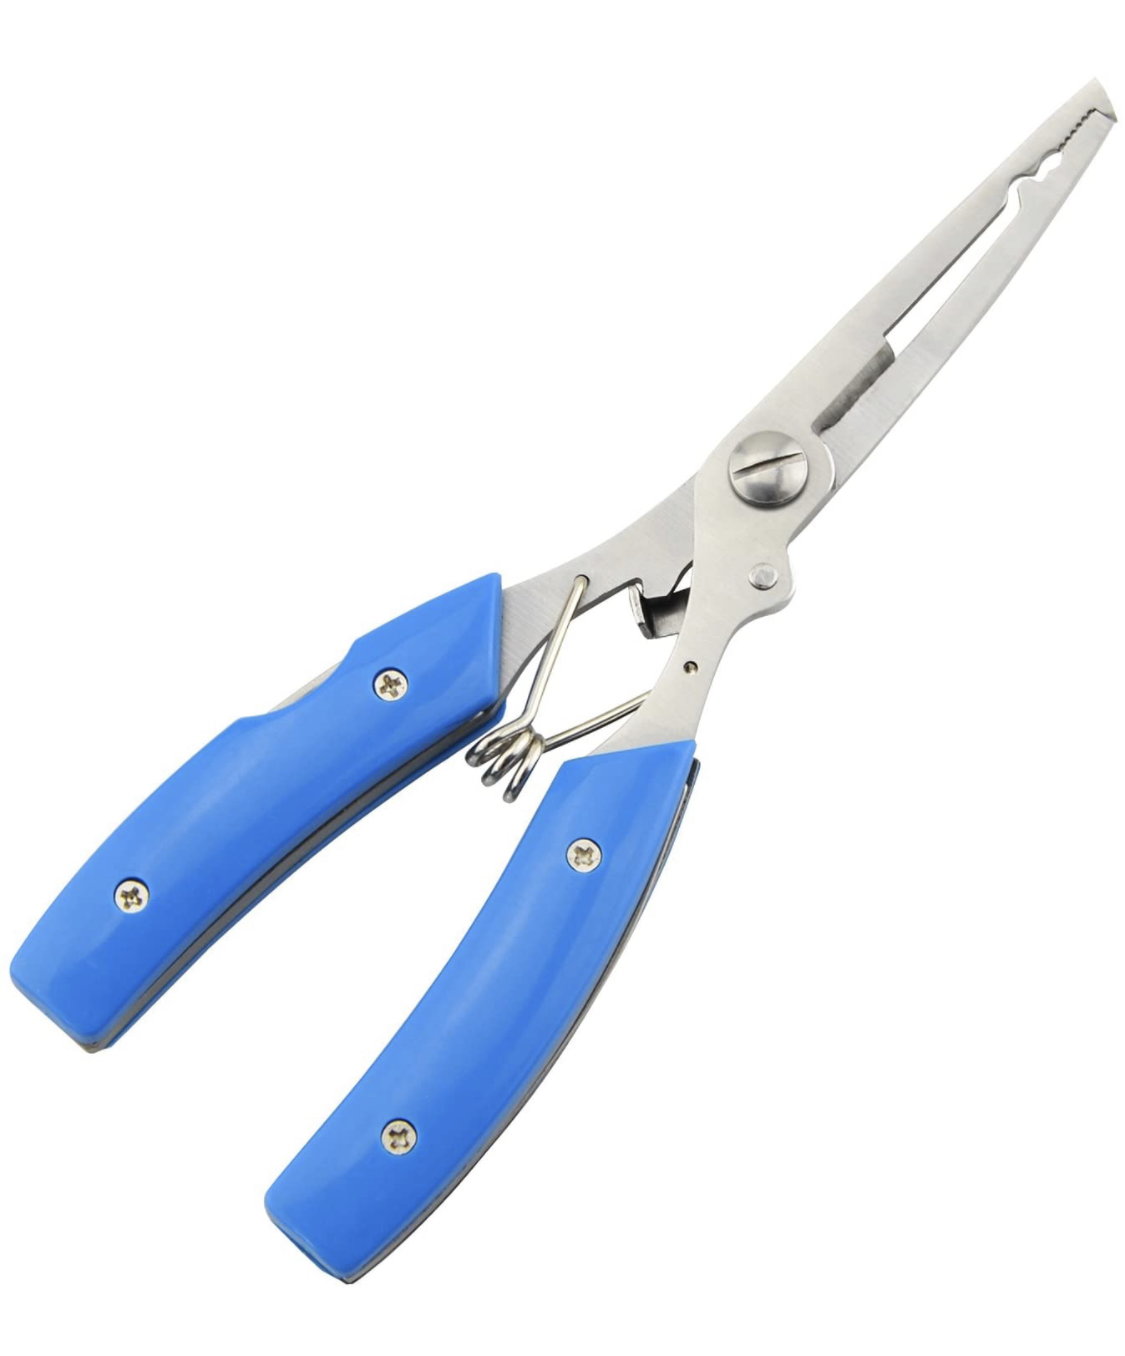 Good fishing pliers - Page 2 - The Hull Truth - Boating and